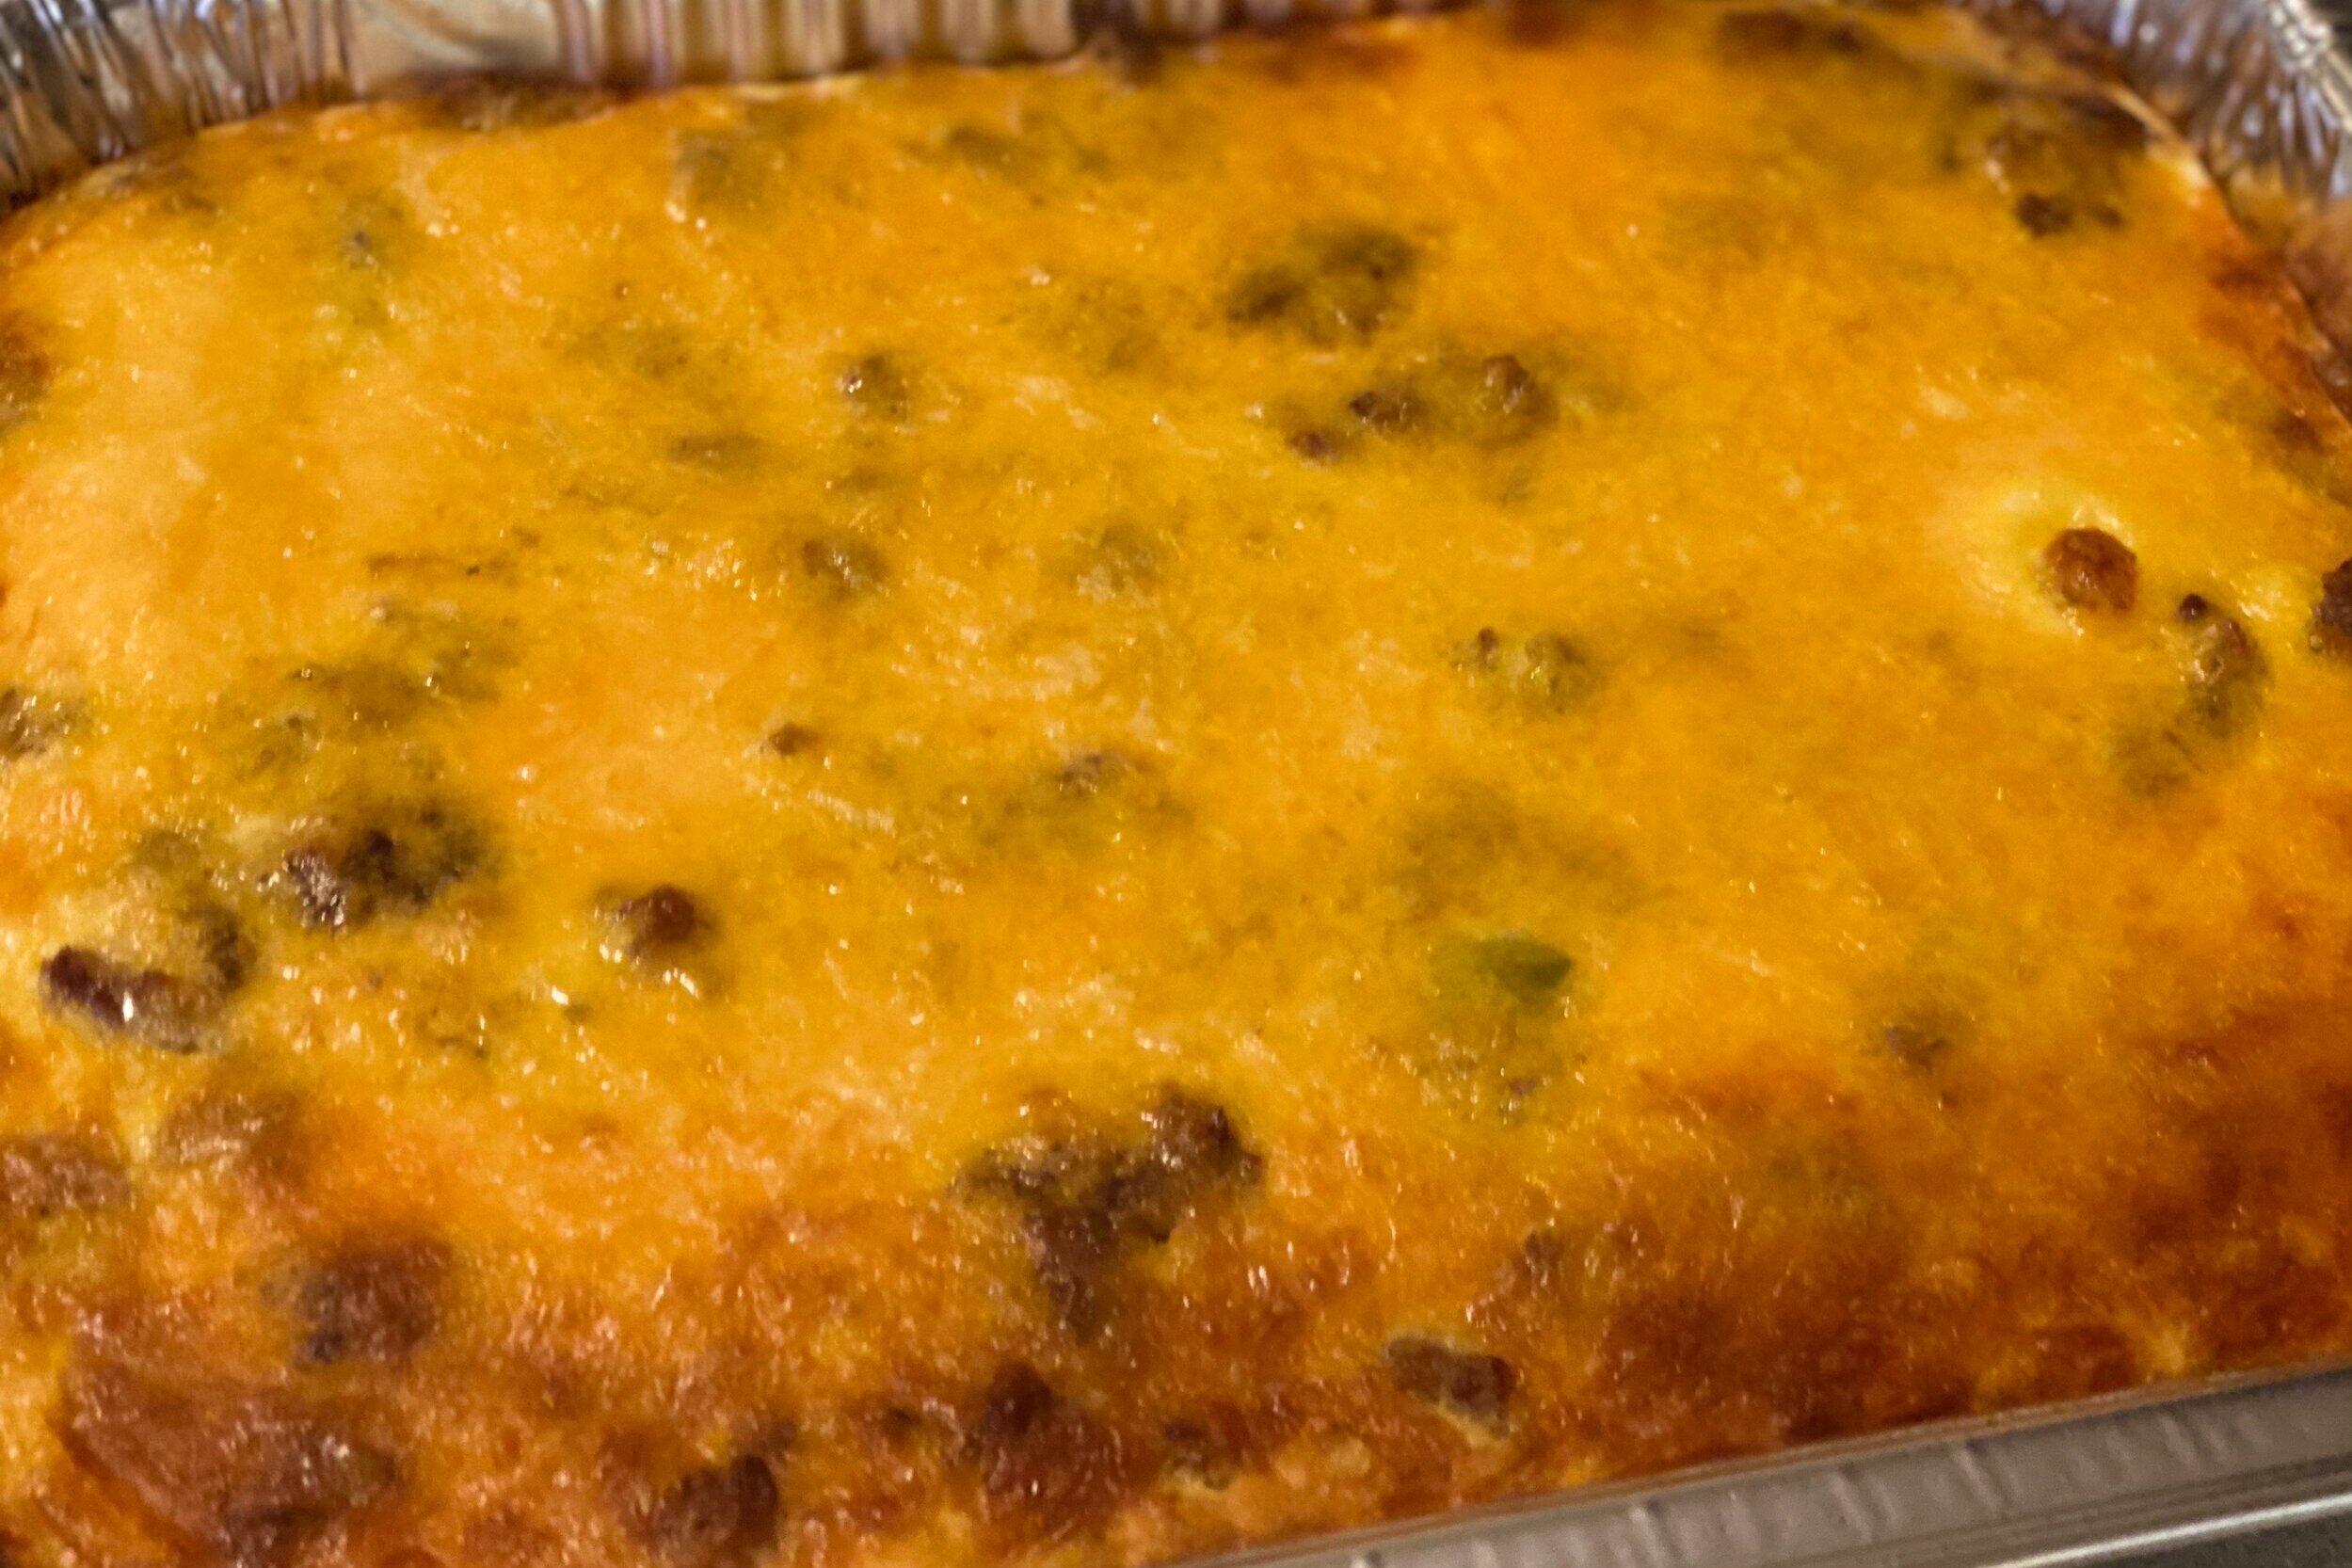  Breakfast casserole with pork sausage, potatoes, diced peppers and onions and cheese 